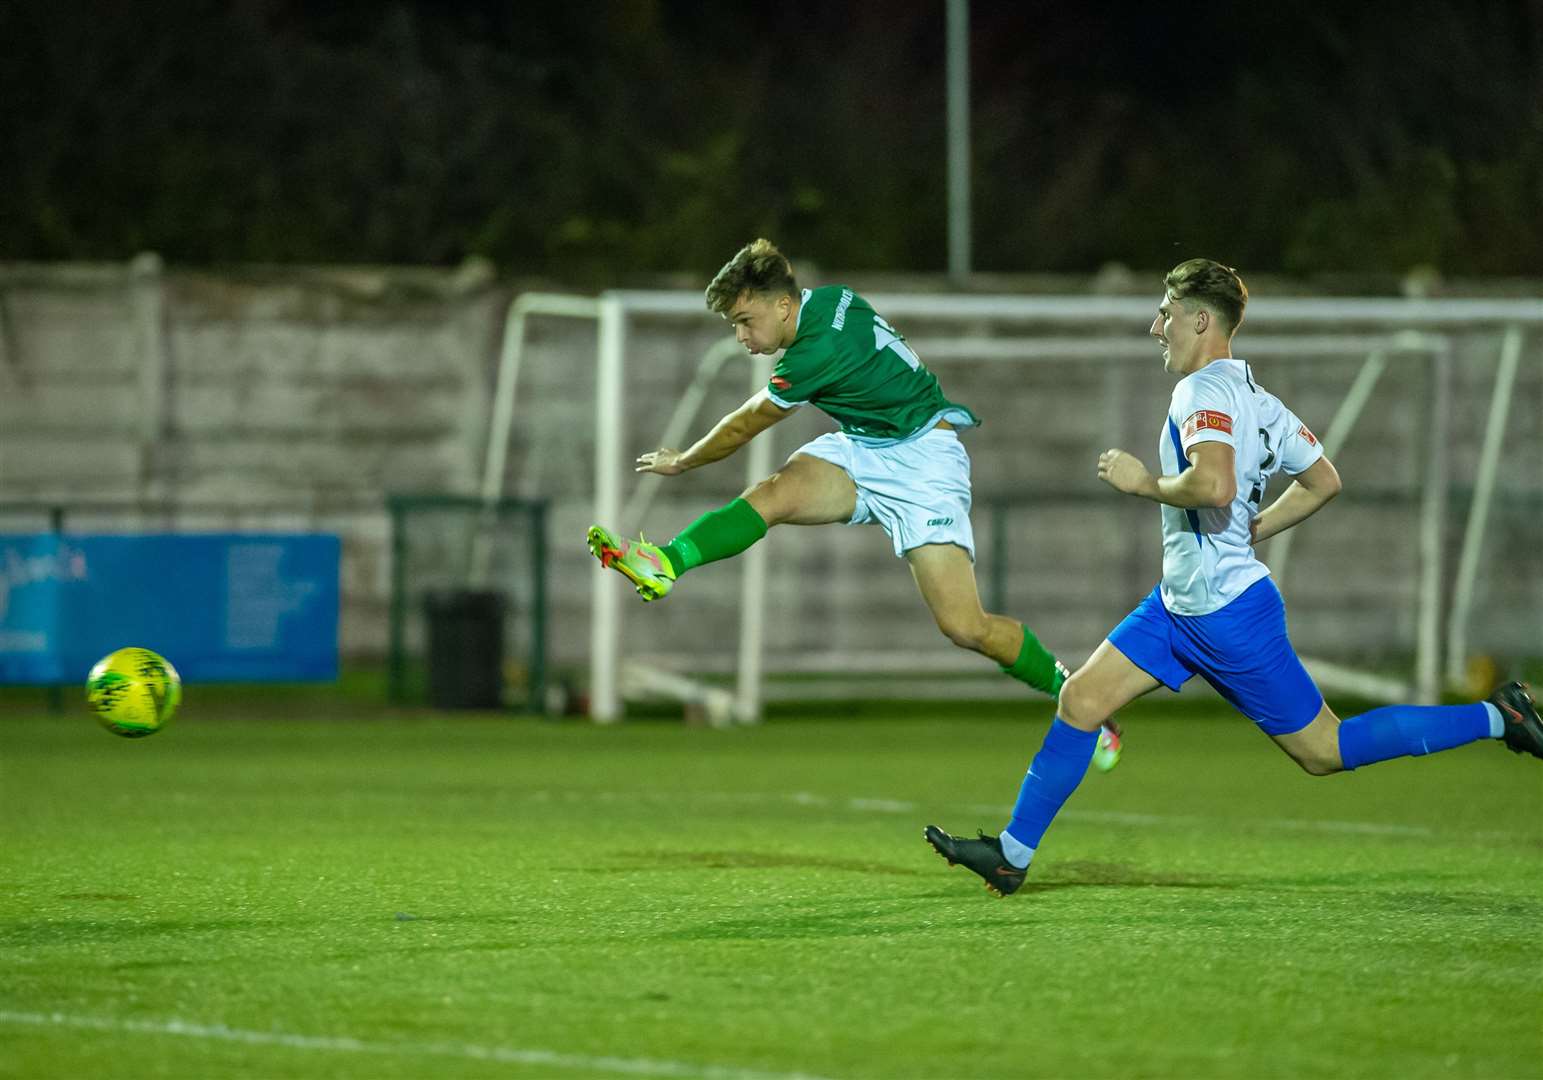 Johan ter Horst completes the scoring in Ashford's win over Hythe Ian Scammell